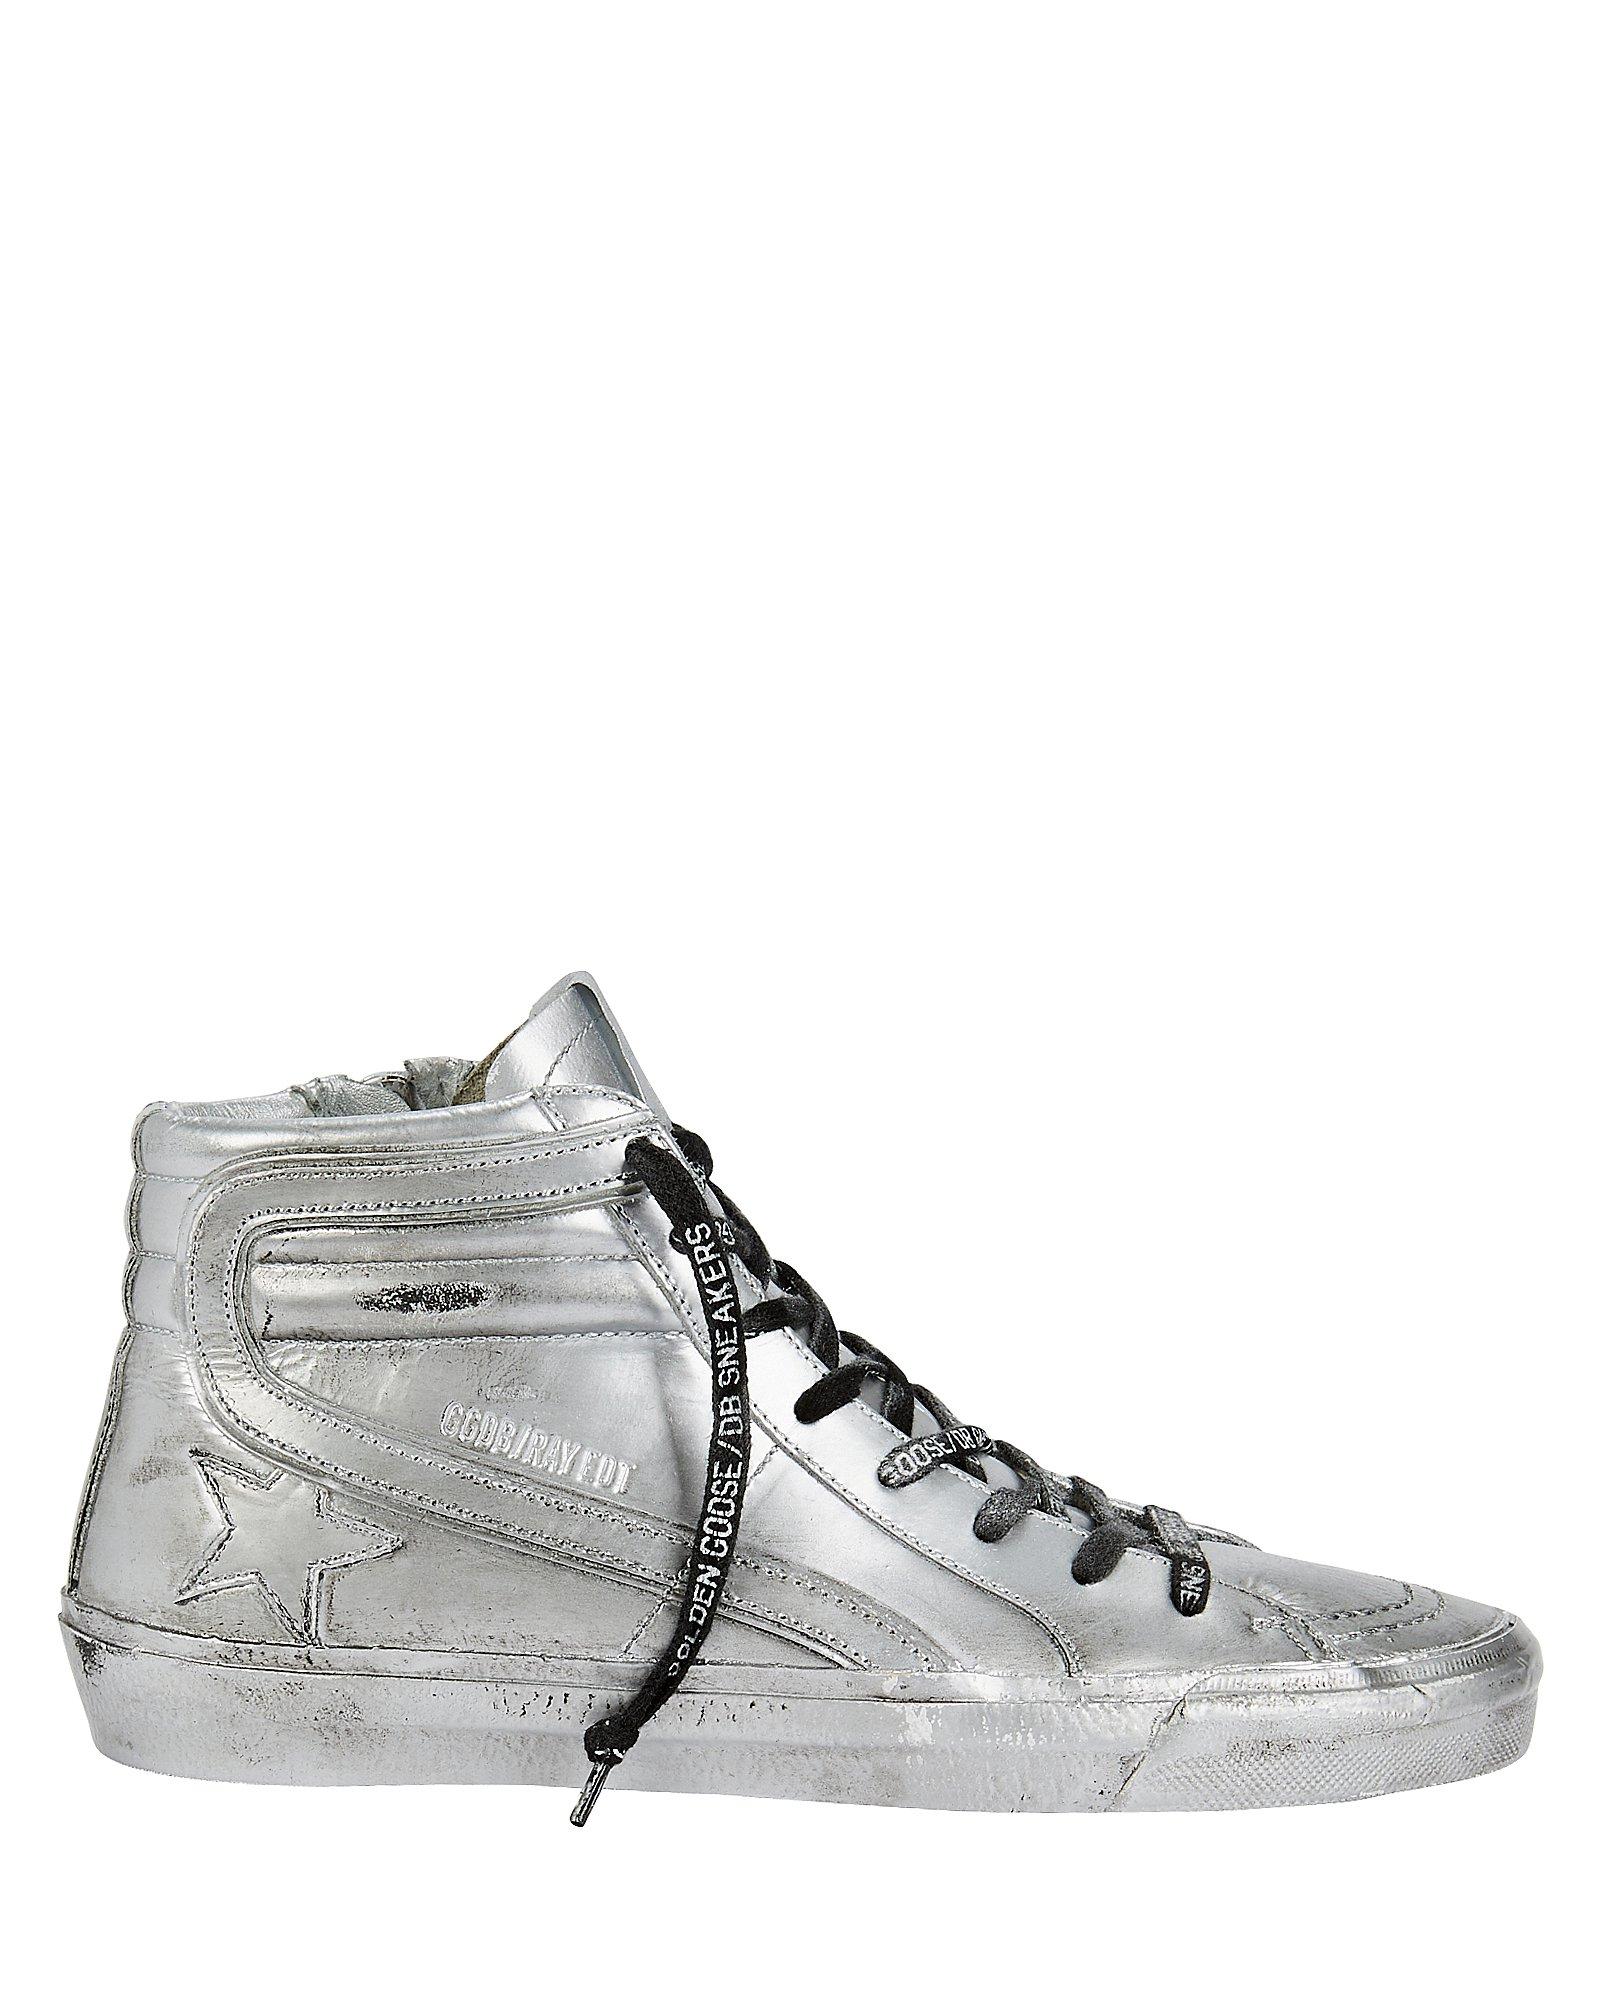 Golden Goose Slide Limited Edition Silver High-top Sneakers in Metallic ...